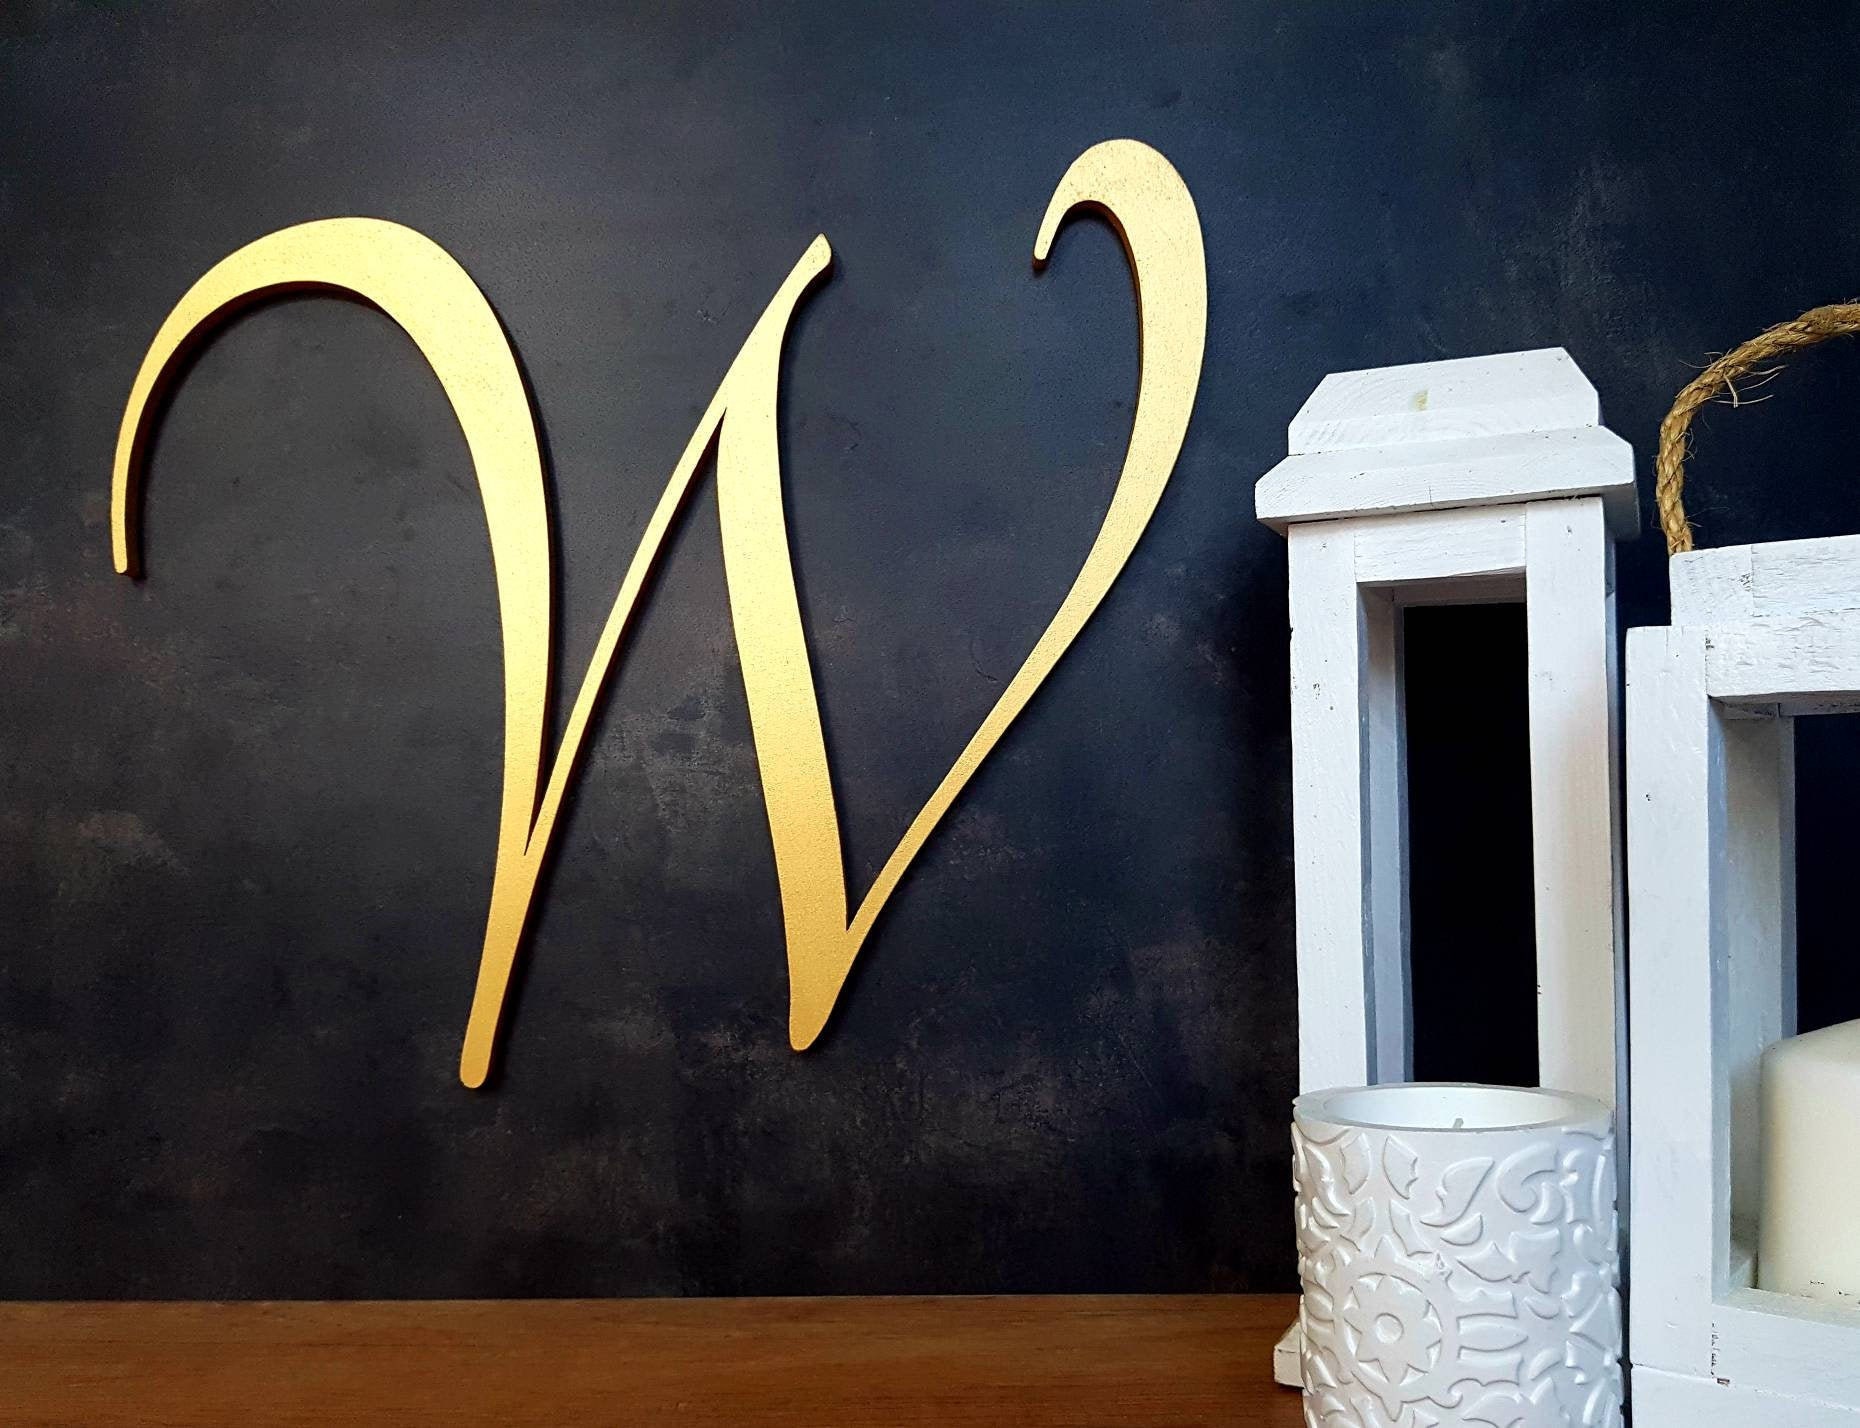 Wood Monogram Gold Accents Alphabet Letters Letter M Crafts Wall